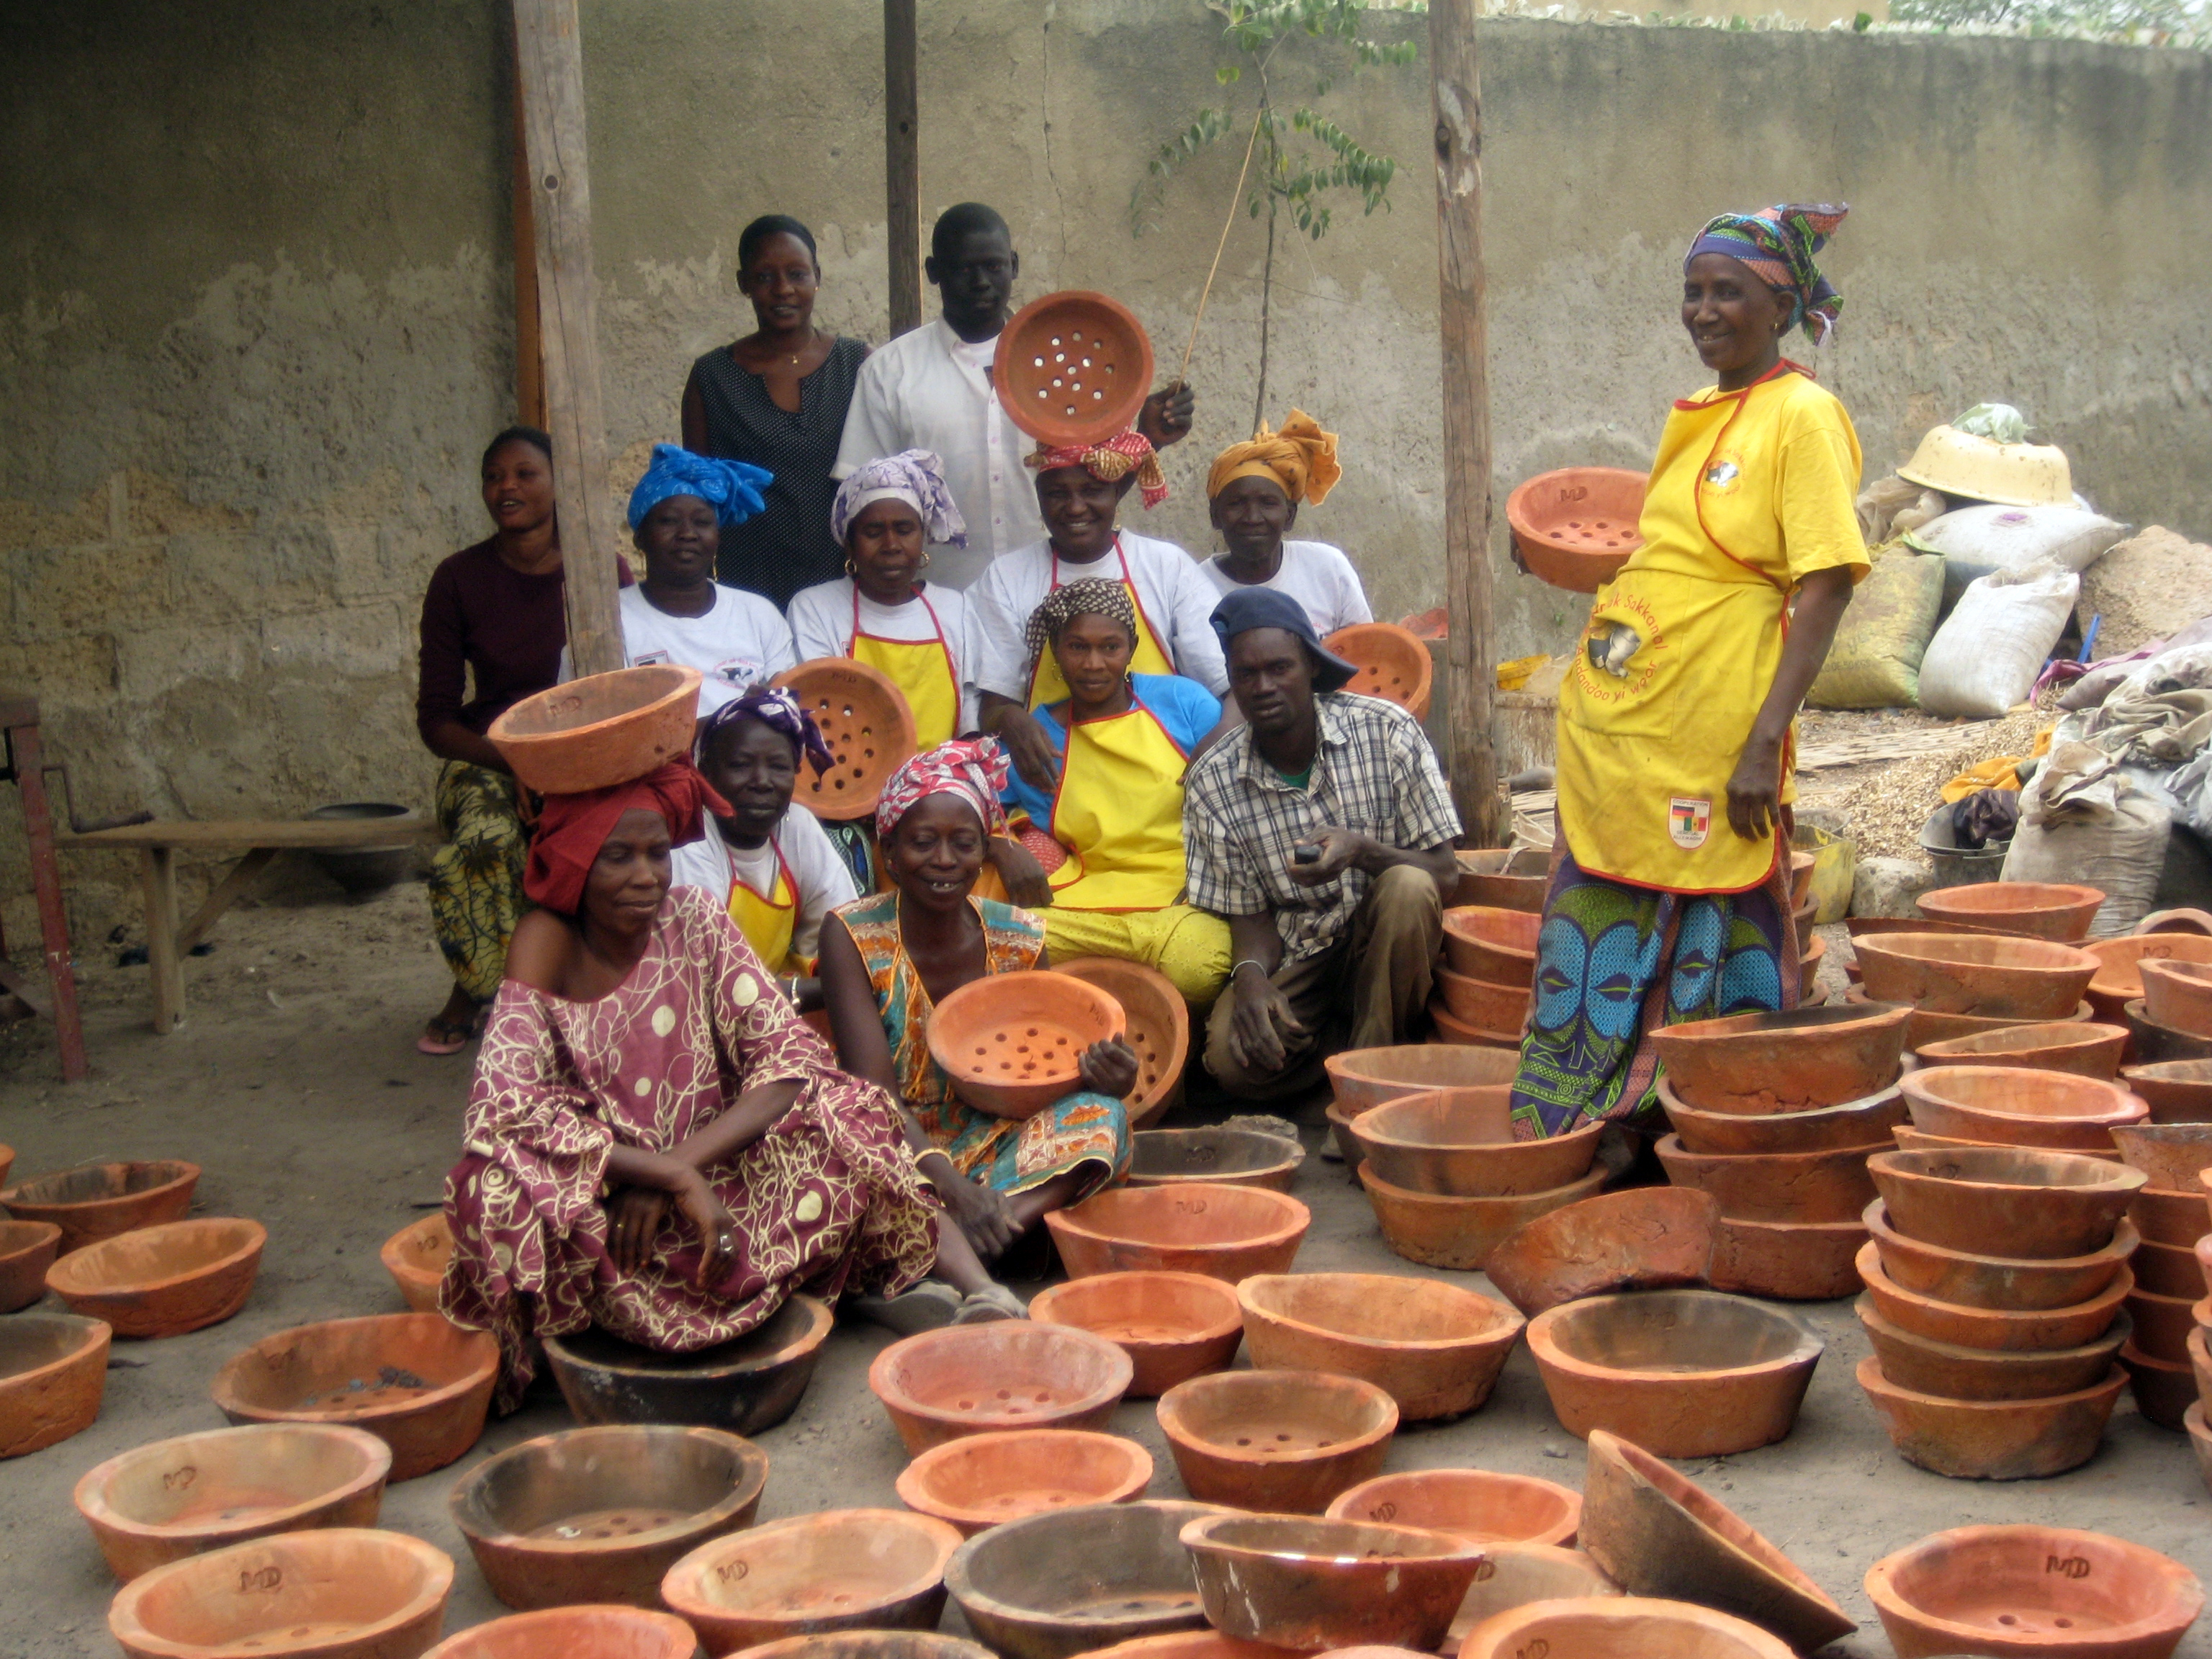 Women producers of ceramic inserts based in the Kaolack region of Senegal.